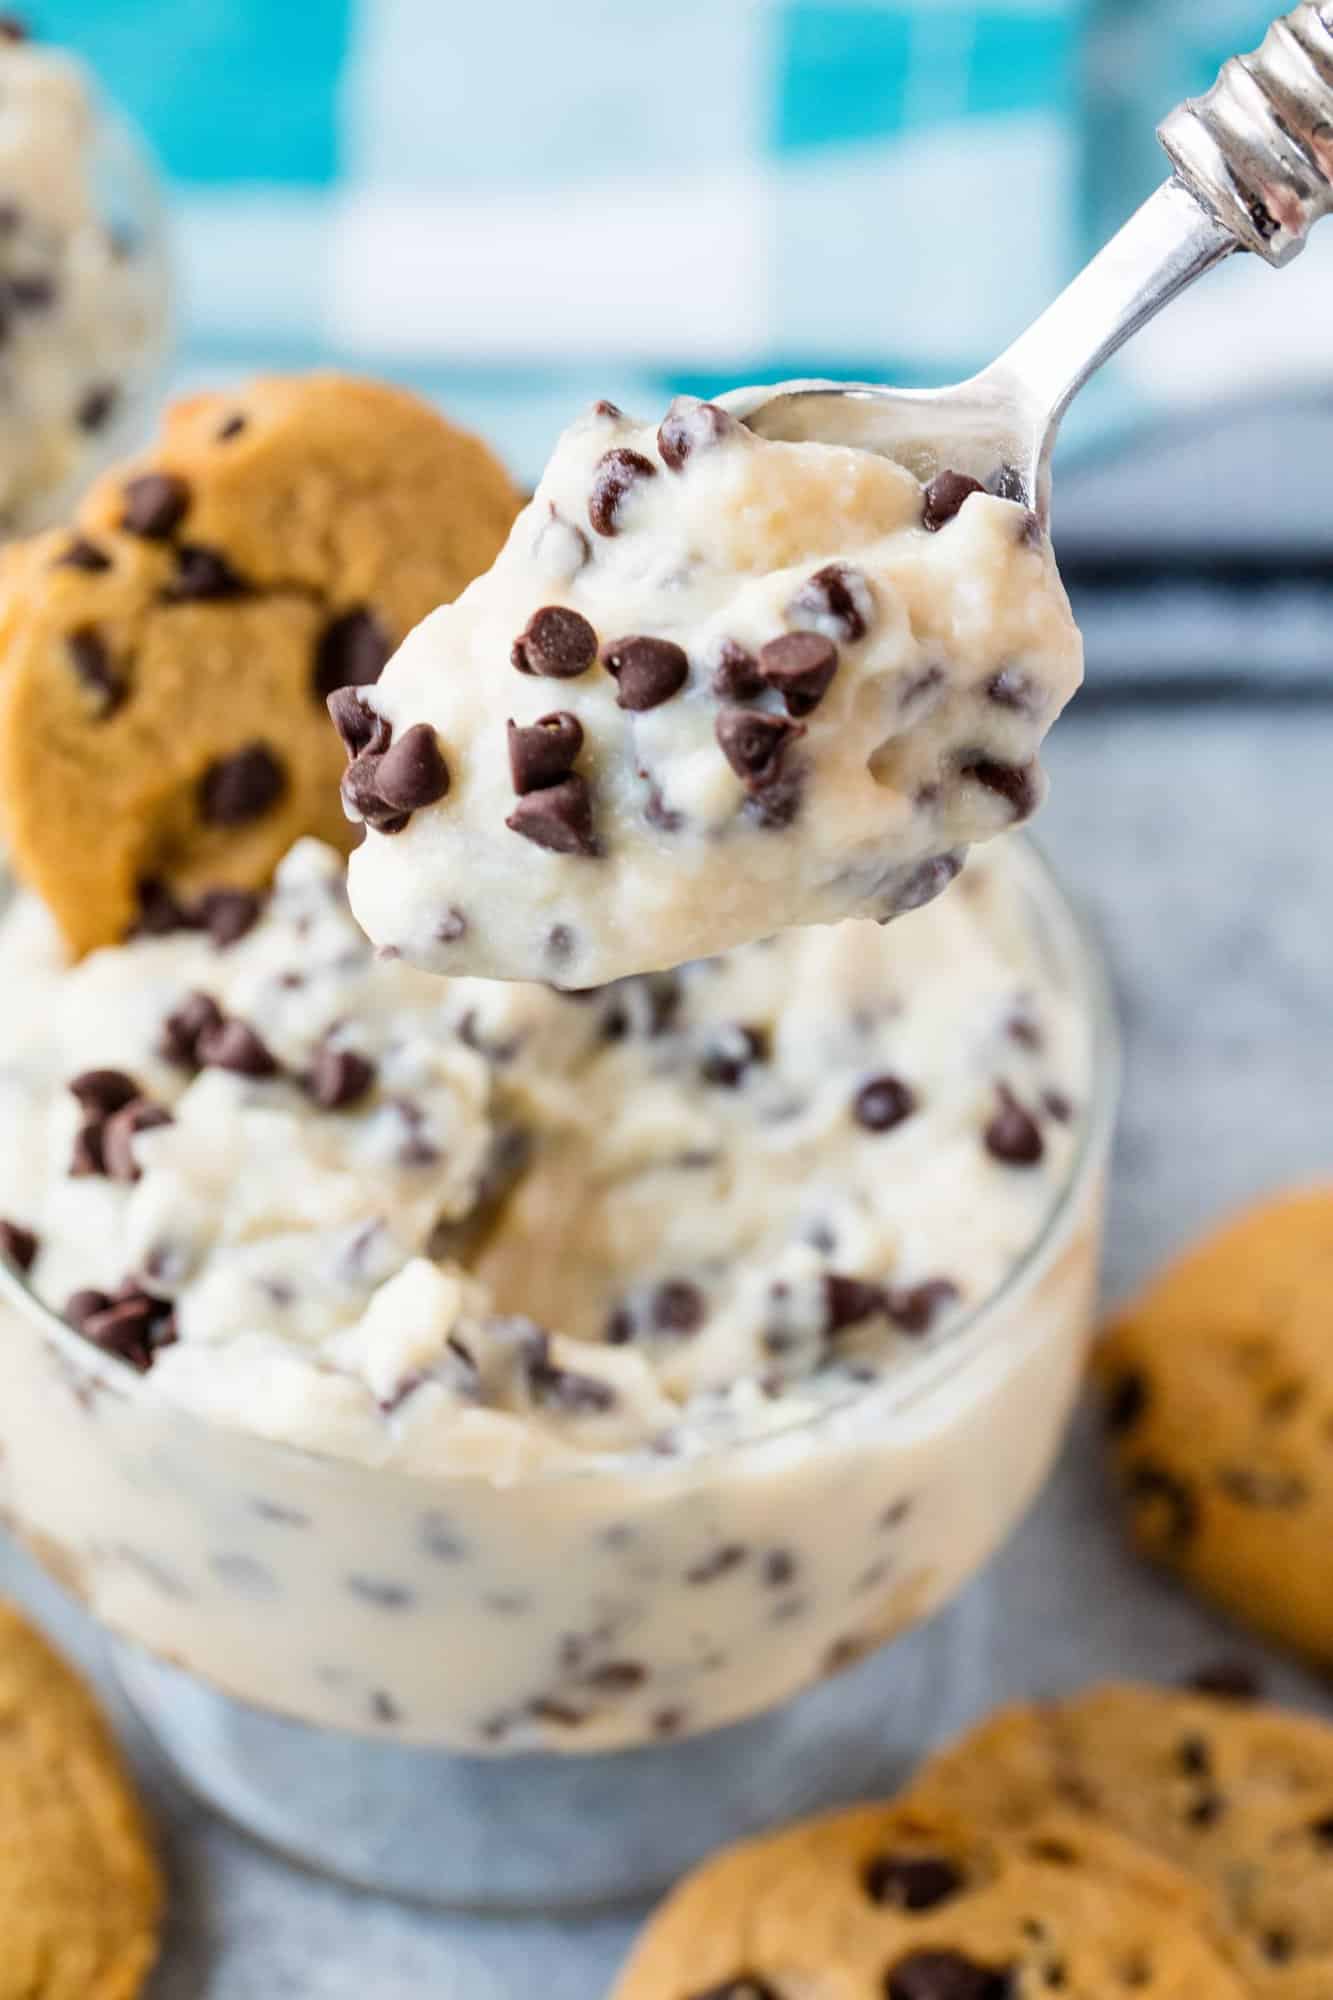 Chocolate Chip Cookie Dough Pudding is a from-scratch brown sugar pudding that tastes just like cookie dough! This easy recipe is sure to become a family favorite dessert!